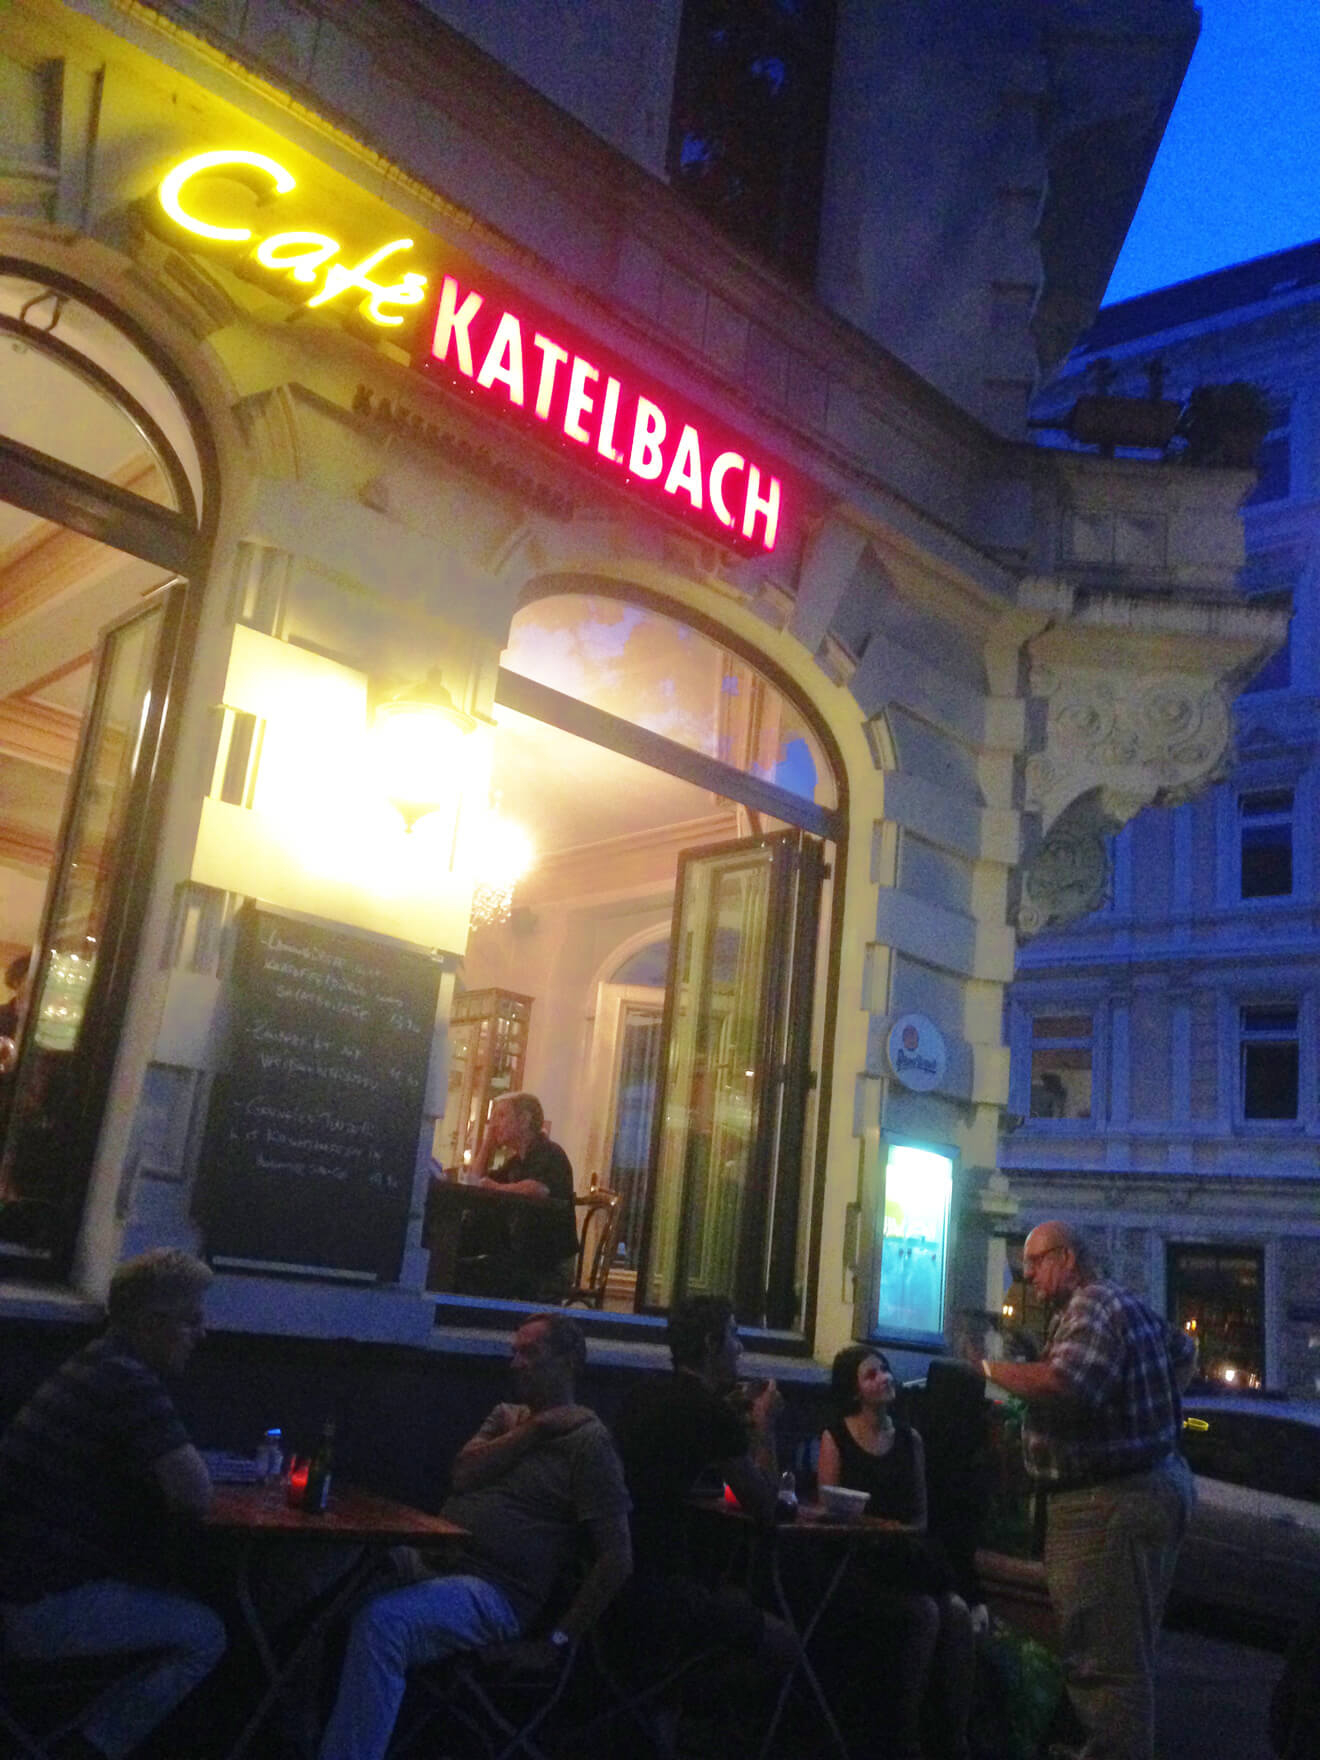 One night in Katelbach